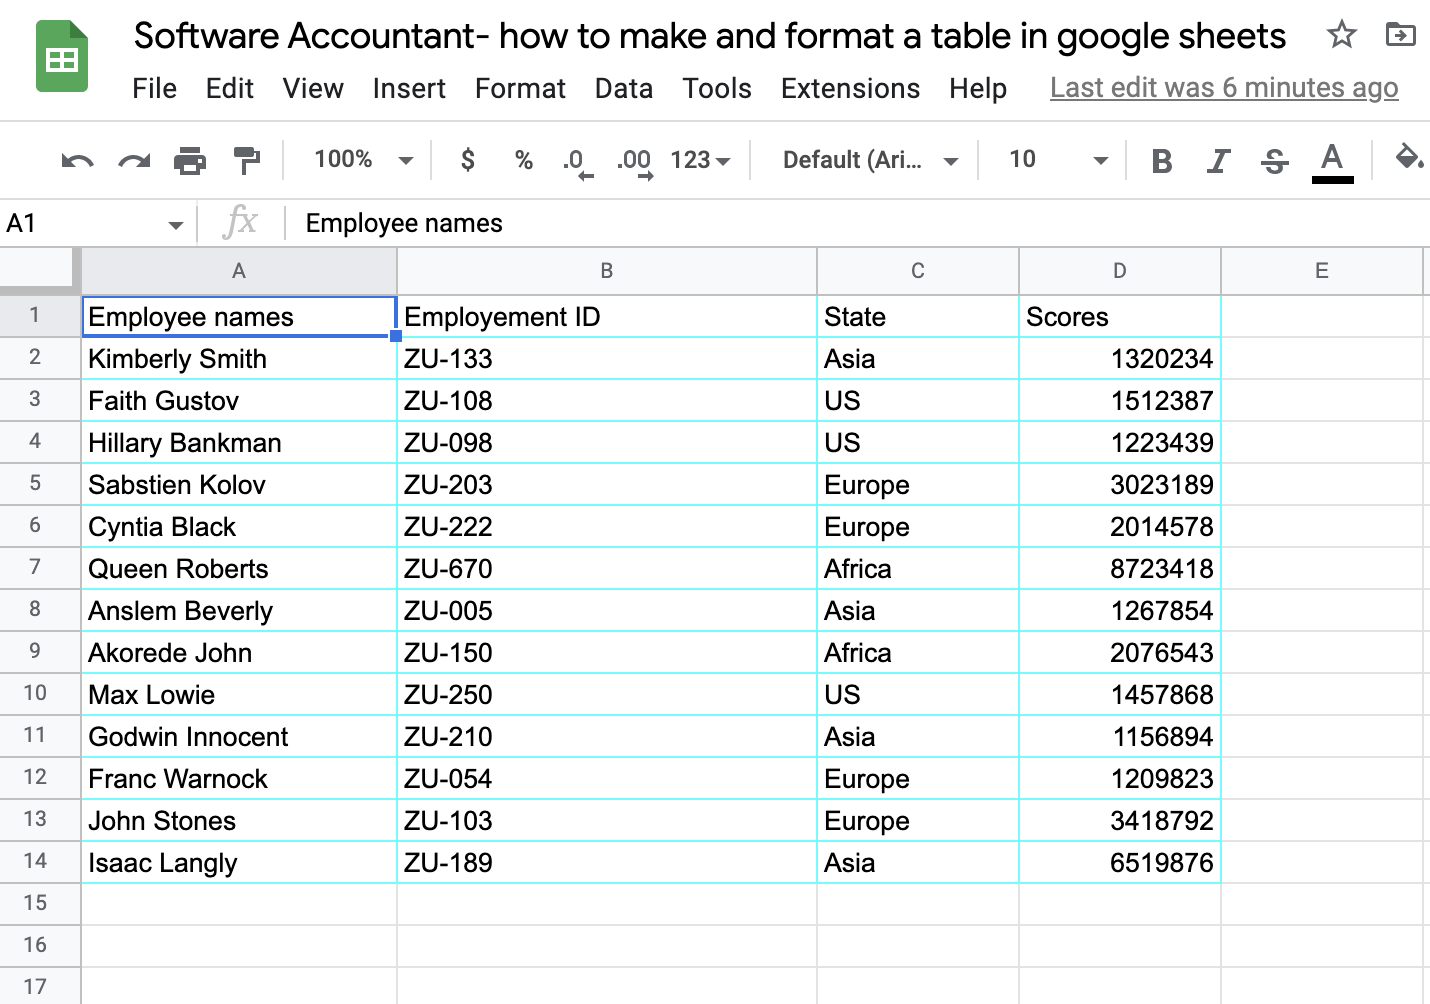 How to make and format a table in Google Sheets: Applying the borders 